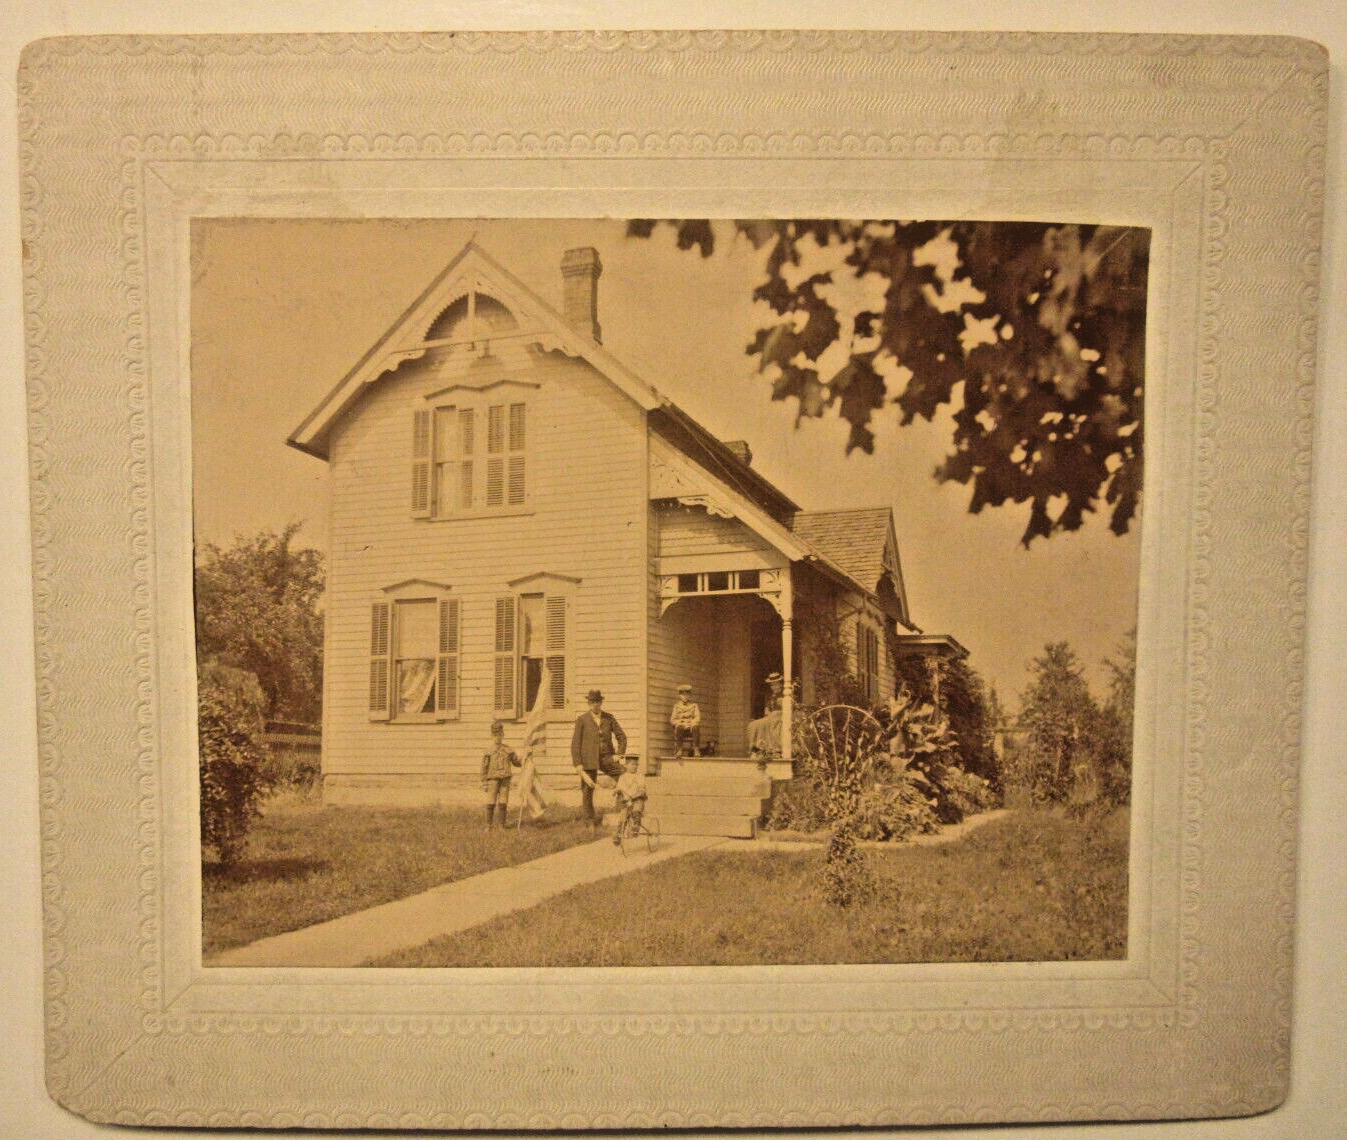 About 1892 CABINET CARD, family on the farm, child with tricycle, 4 3/4 x 3 3/4